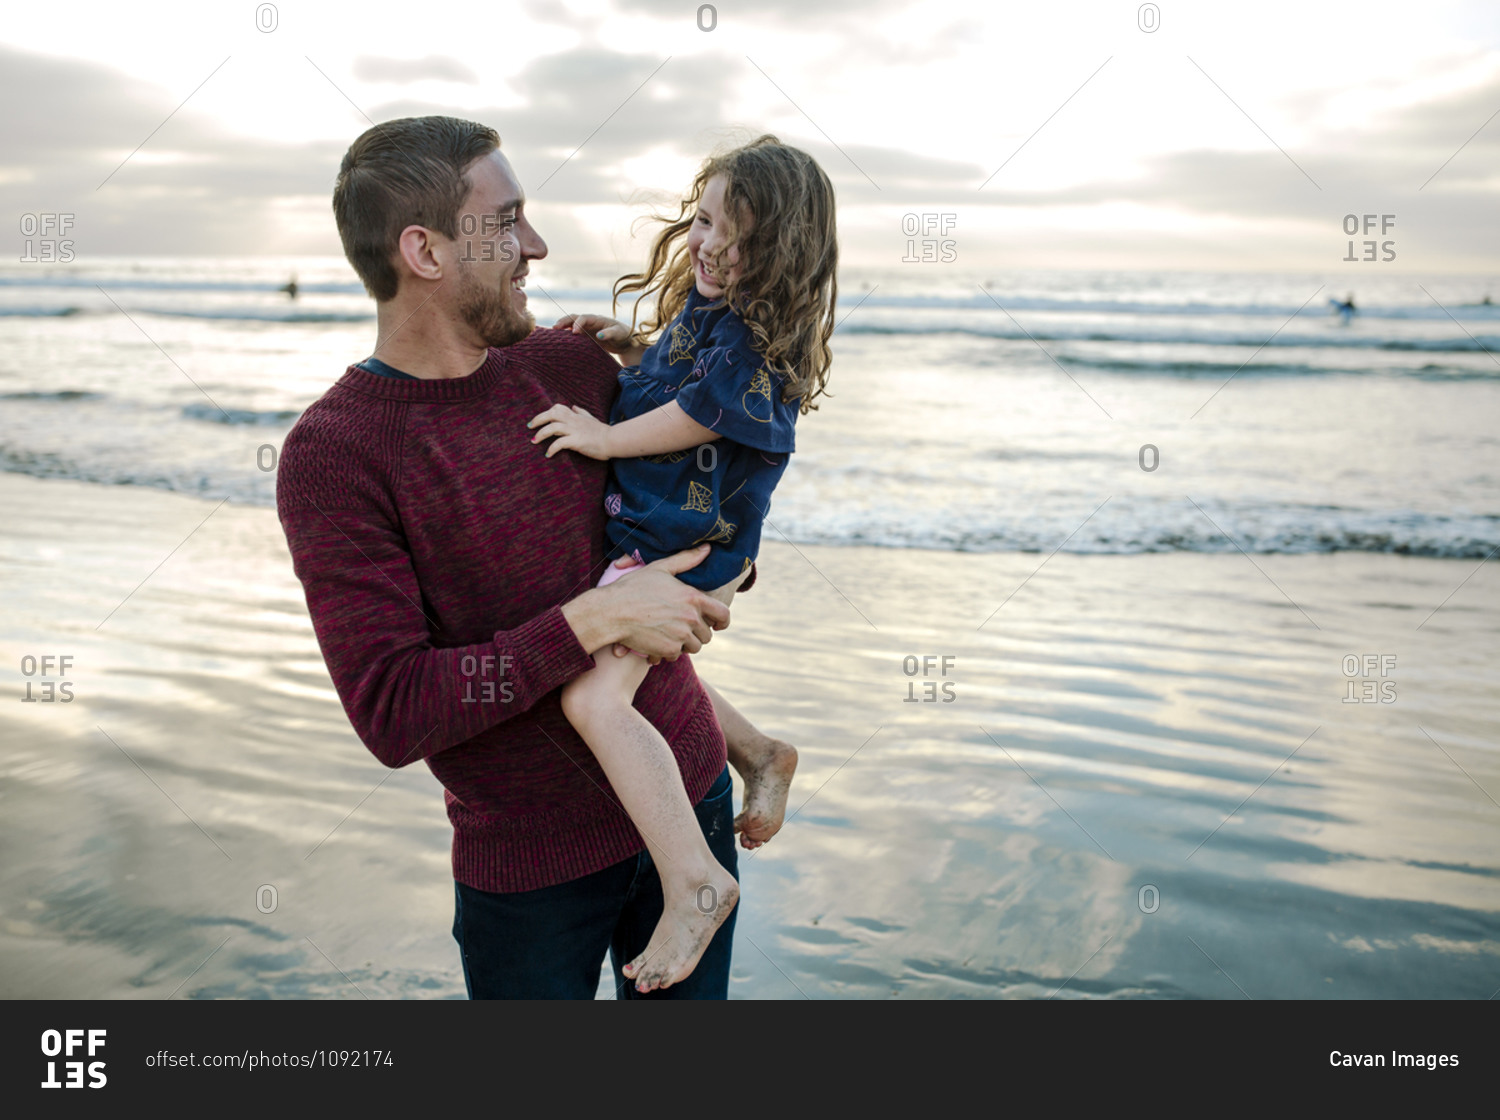 Young dad holding laughing bare-legged 3 yr old daughter at the ocean